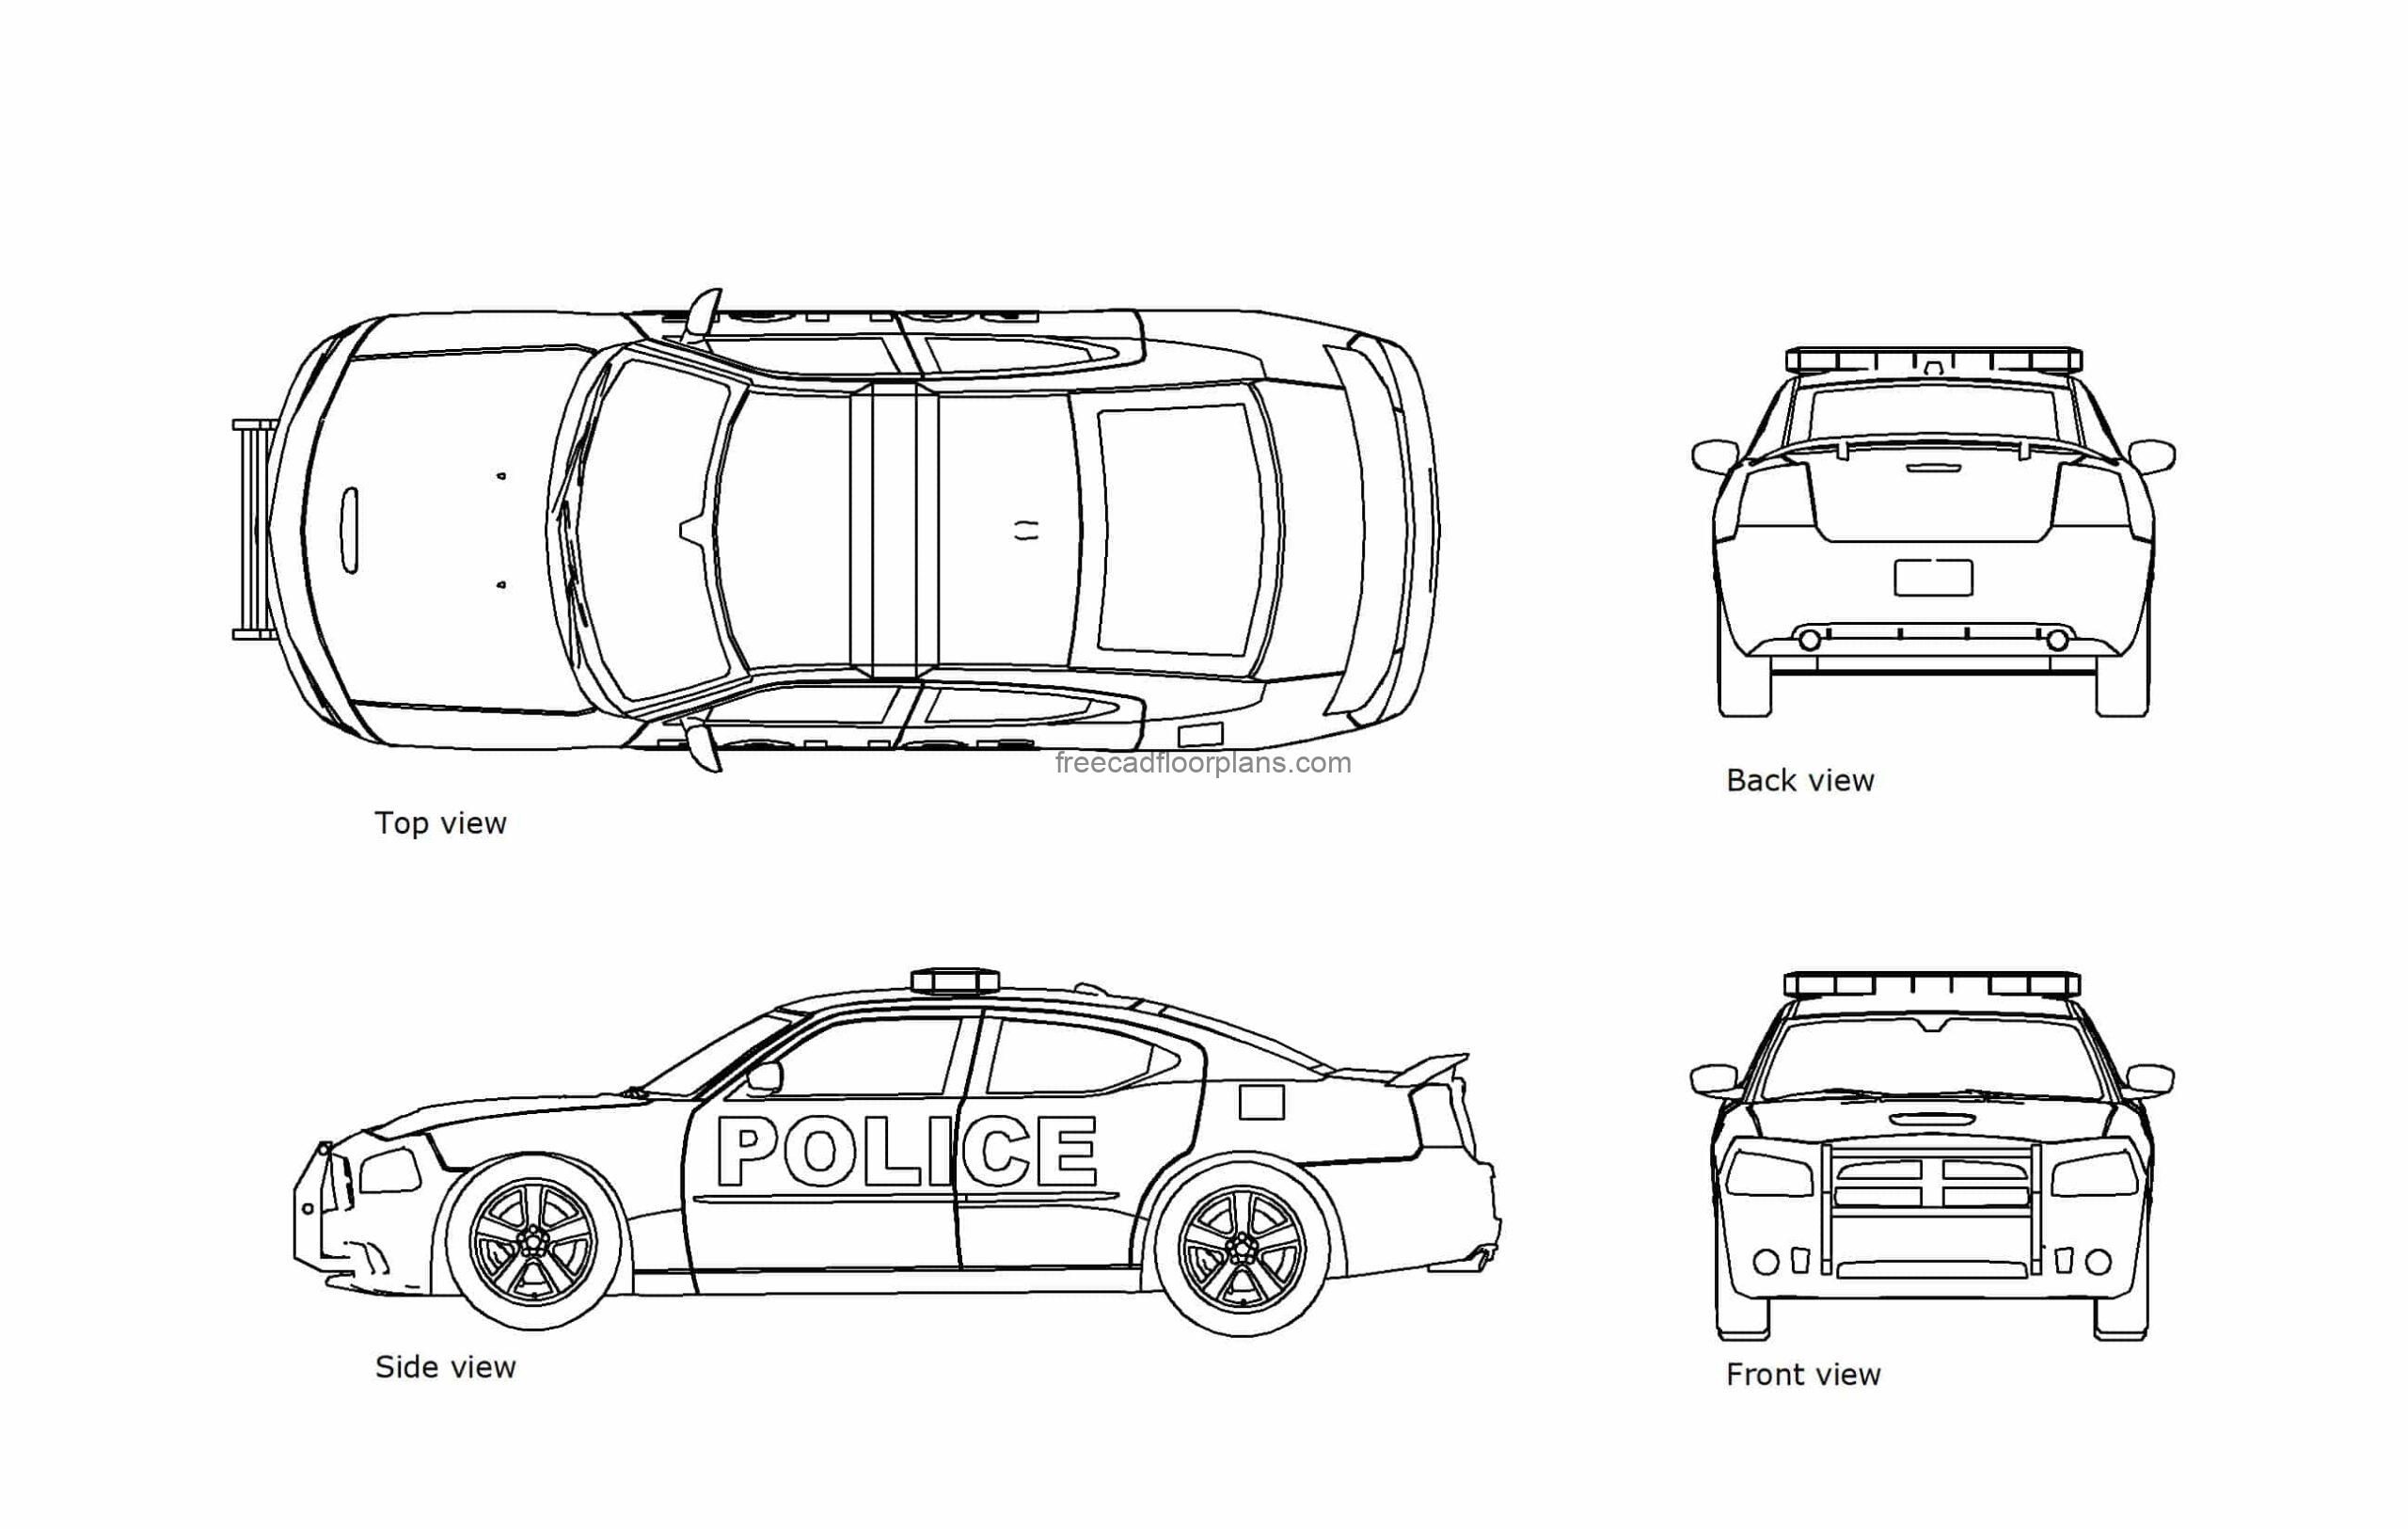 autocad drawing of a US police car, plan and elevation 2d views, dwg file free for download